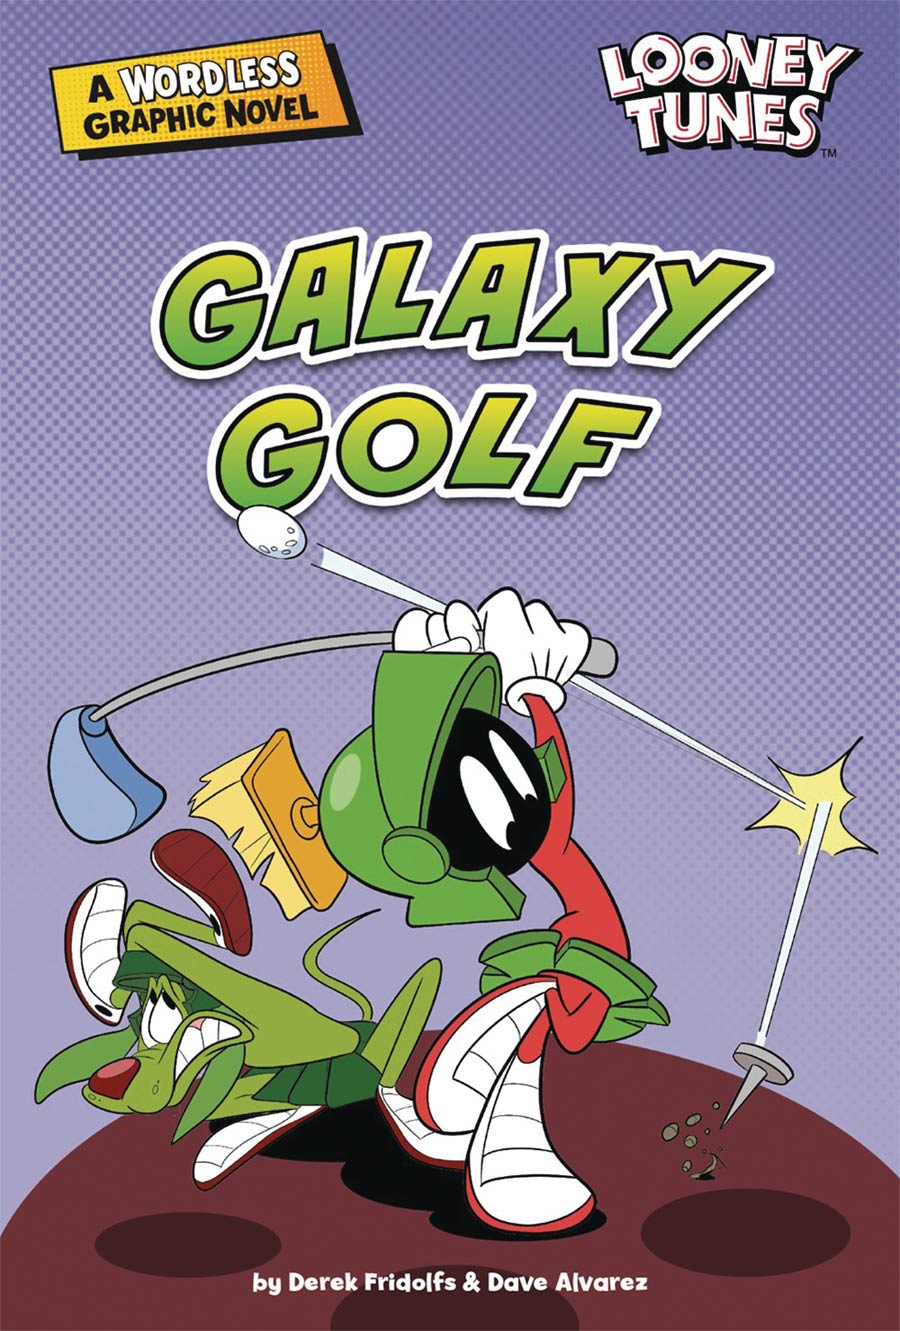 Looney Tunes A Wordless Graphic Novel Galaxy Golf TP